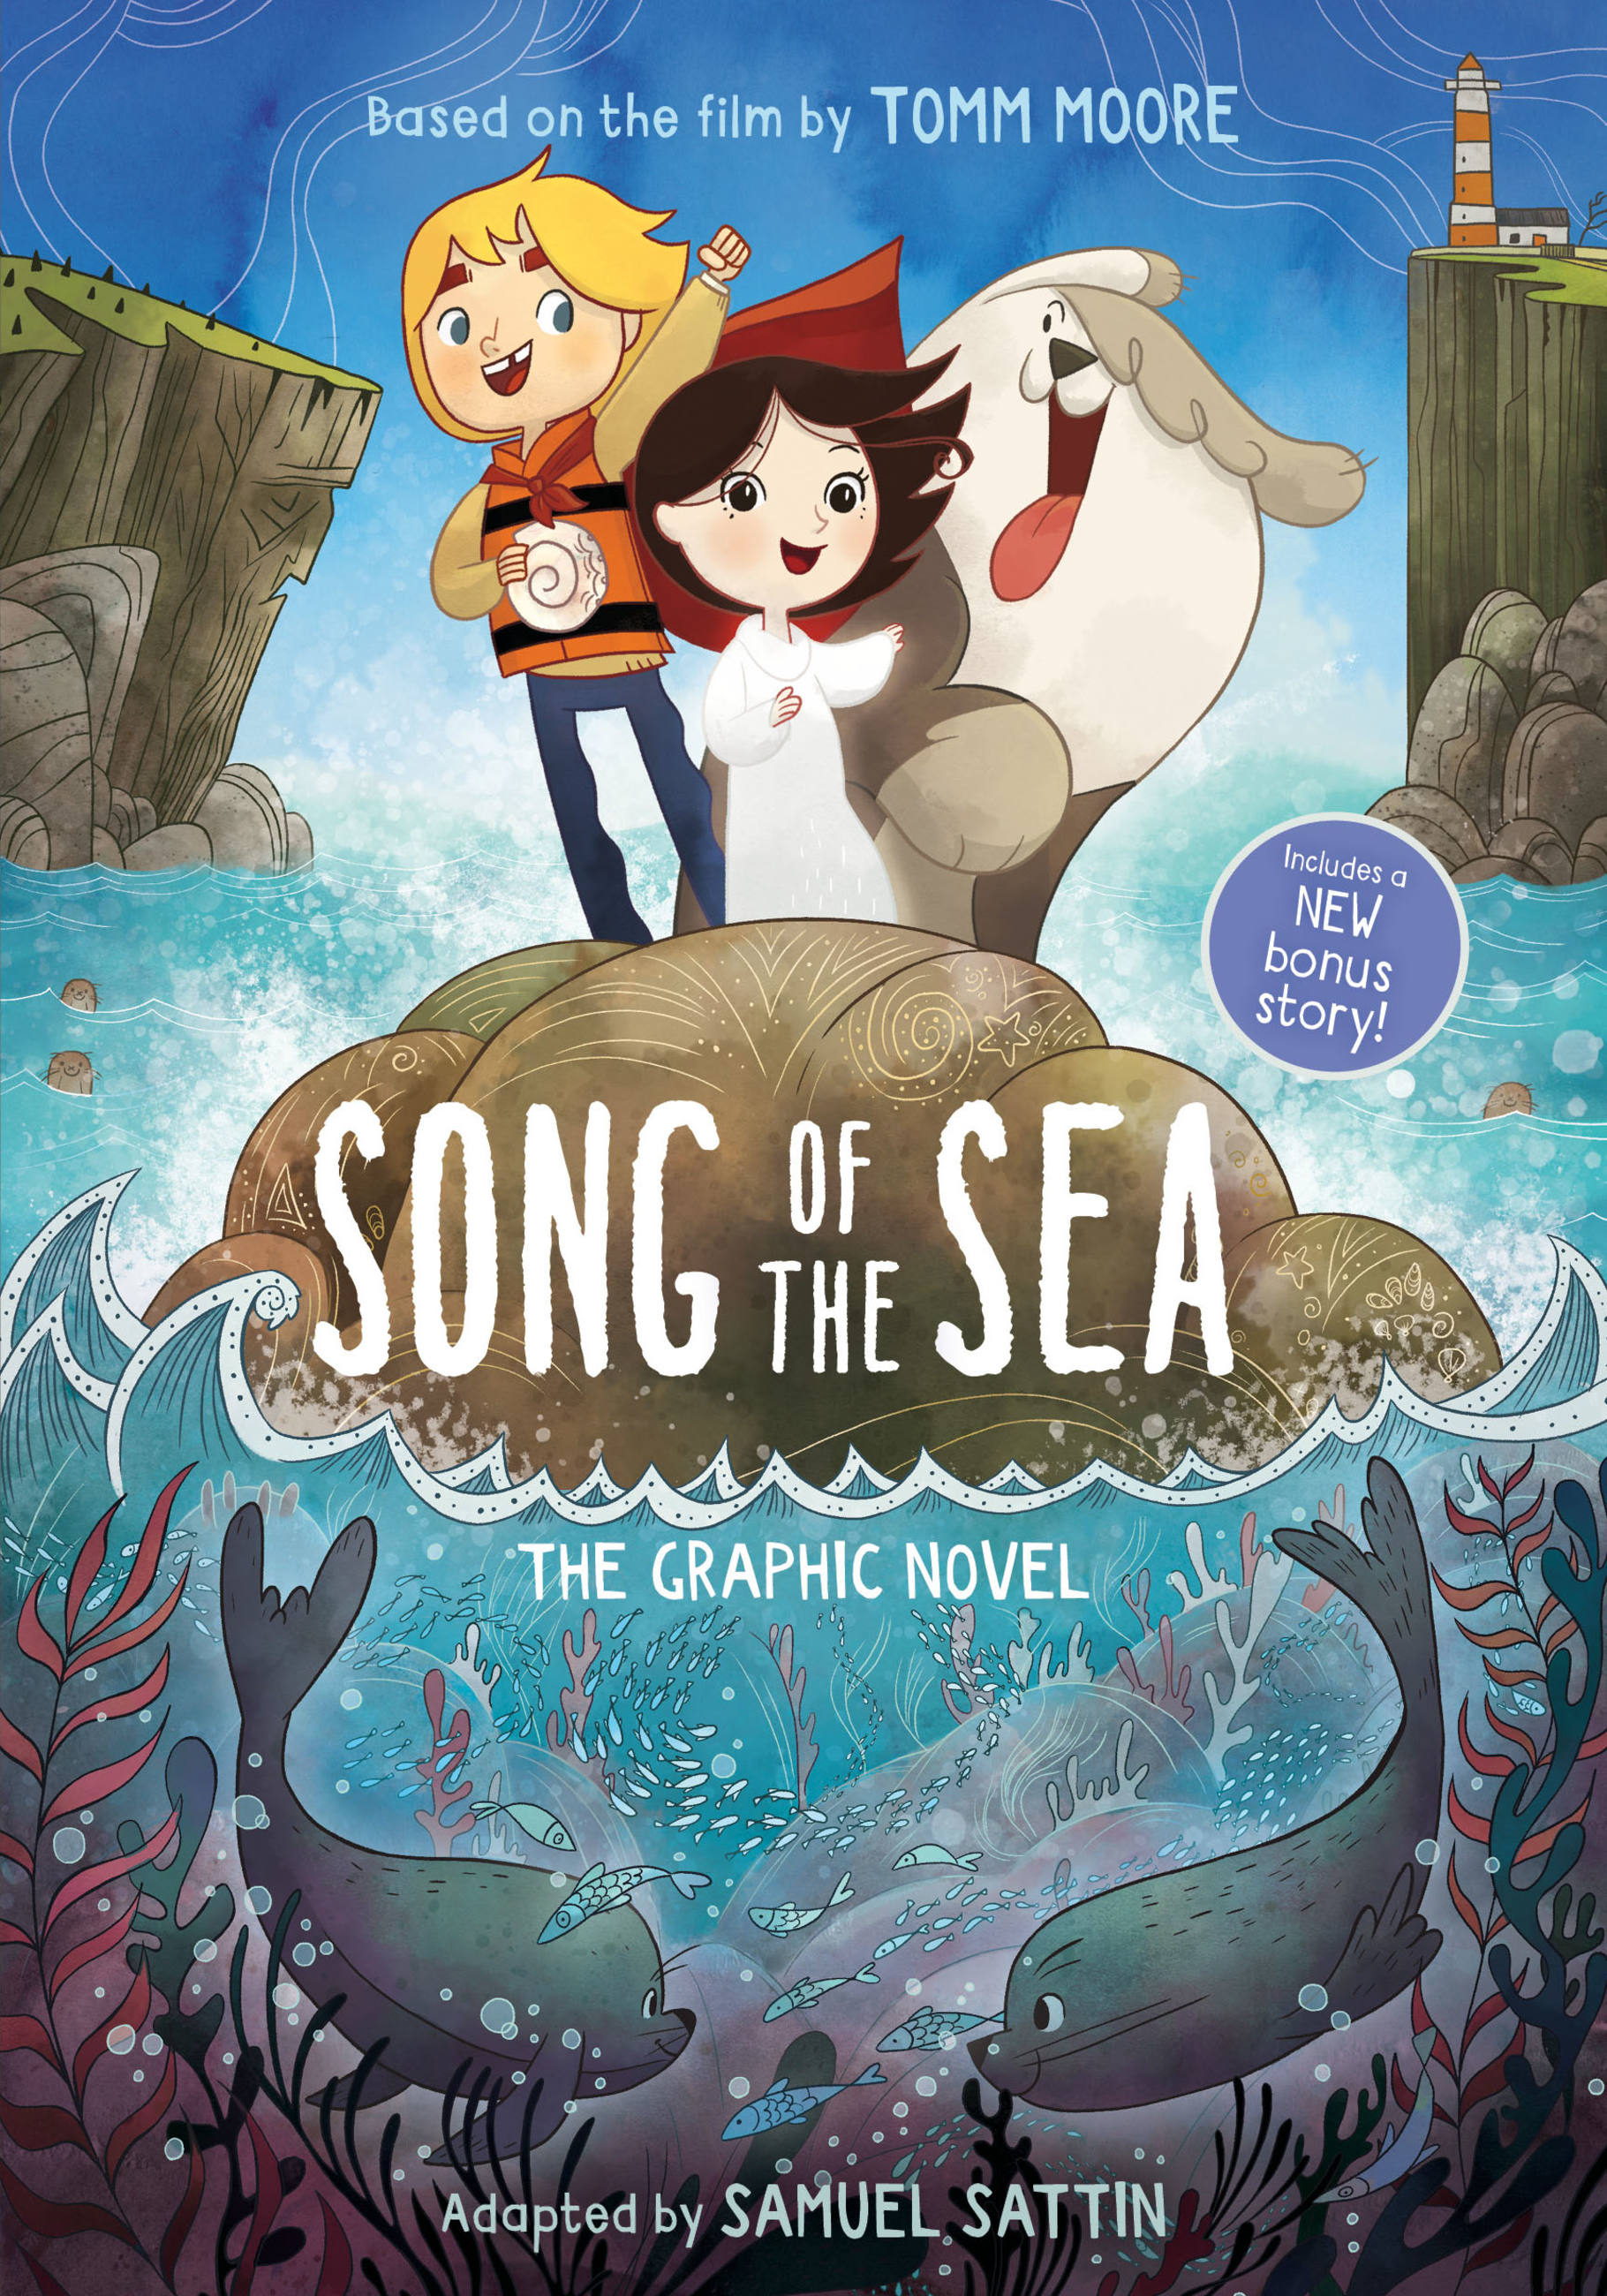 Song of the Sea: The Graphic Novel by Tomm Moore | Little, Brown Books for  Young Readers